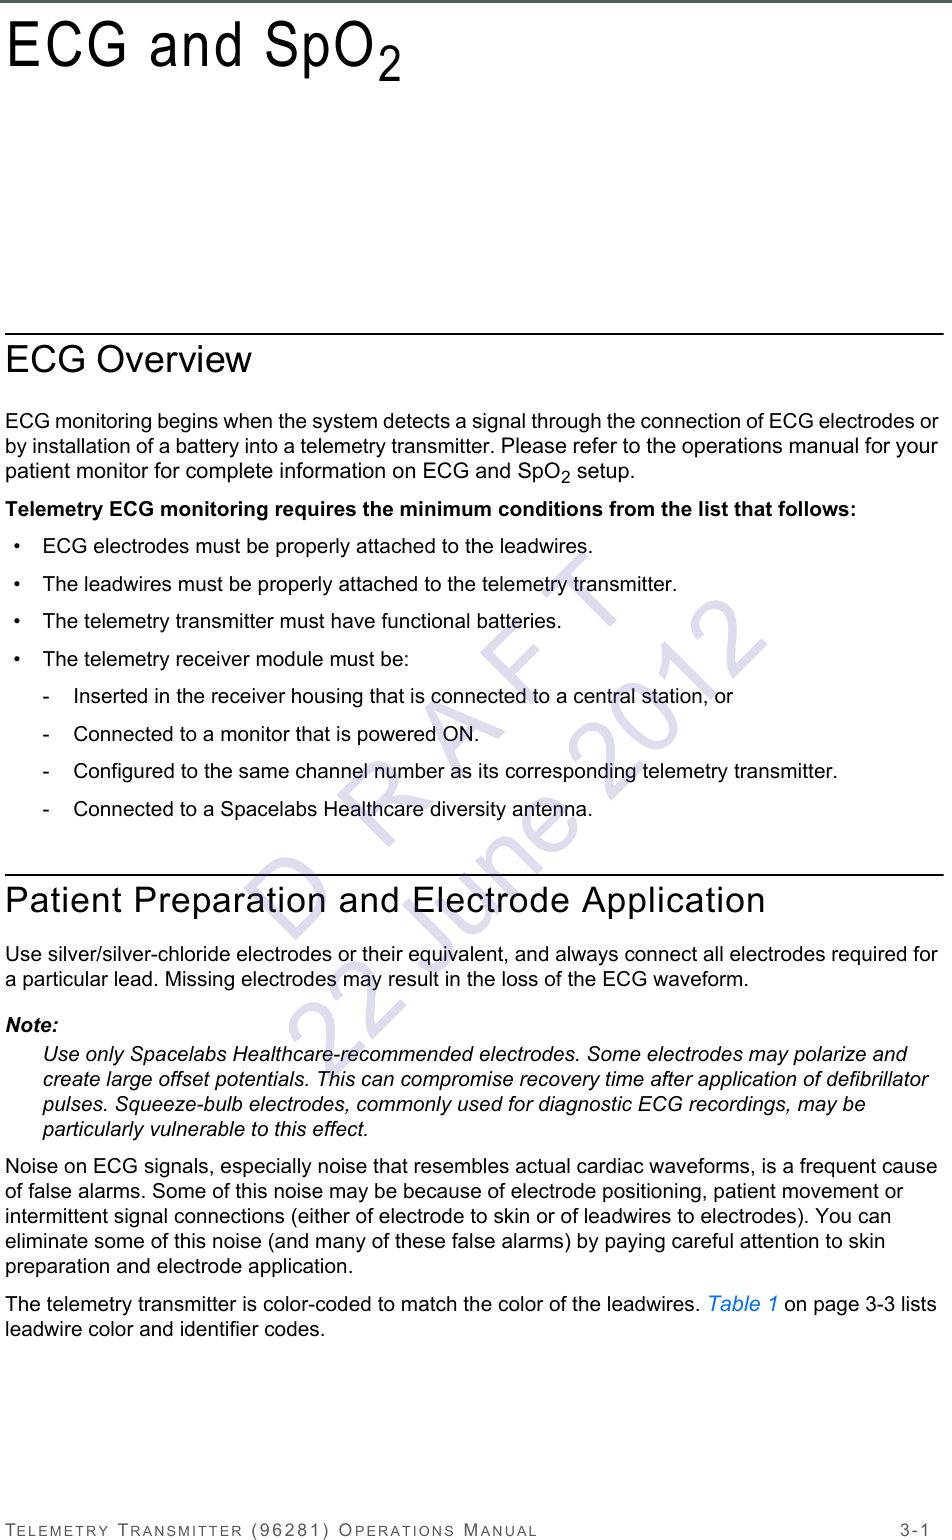 TELEMETRY TRANSMITTER (96281) OPERATIONS MANUAL 3-1ECG and SpO2ECG OverviewECG monitoring begins when the system detects a signal through the connection of ECG electrodes or by installation of a battery into a telemetry transmitter. Please refer to the operations manual for your patient monitor for complete information on ECG and SpO2 setup.Telemetry ECG monitoring requires the minimum conditions from the list that follows:• ECG electrodes must be properly attached to the leadwires.• The leadwires must be properly attached to the telemetry transmitter.• The telemetry transmitter must have functional batteries.• The telemetry receiver module must be:- Inserted in the receiver housing that is connected to a central station, or- Connected to a monitor that is powered ON.- Configured to the same channel number as its corresponding telemetry transmitter. - Connected to a Spacelabs Healthcare diversity antenna.Patient Preparation and Electrode ApplicationUse silver/silver-chloride electrodes or their equivalent, and always connect all electrodes required for a particular lead. Missing electrodes may result in the loss of the ECG waveform.Note:Use only Spacelabs Healthcare-recommended electrodes. Some electrodes may polarize and create large offset potentials. This can compromise recovery time after application of defibrillator pulses. Squeeze-bulb electrodes, commonly used for diagnostic ECG recordings, may be particularly vulnerable to this effect.Noise on ECG signals, especially noise that resembles actual cardiac waveforms, is a frequent cause of false alarms. Some of this noise may be because of electrode positioning, patient movement or intermittent signal connections (either of electrode to skin or of leadwires to electrodes). You can eliminate some of this noise (and many of these false alarms) by paying careful attention to skin preparation and electrode application.The telemetry transmitter is color-coded to match the color of the leadwires. Table 1 on page 3-3 lists leadwire color and identifier codes.D  R A F T 22 June 2012